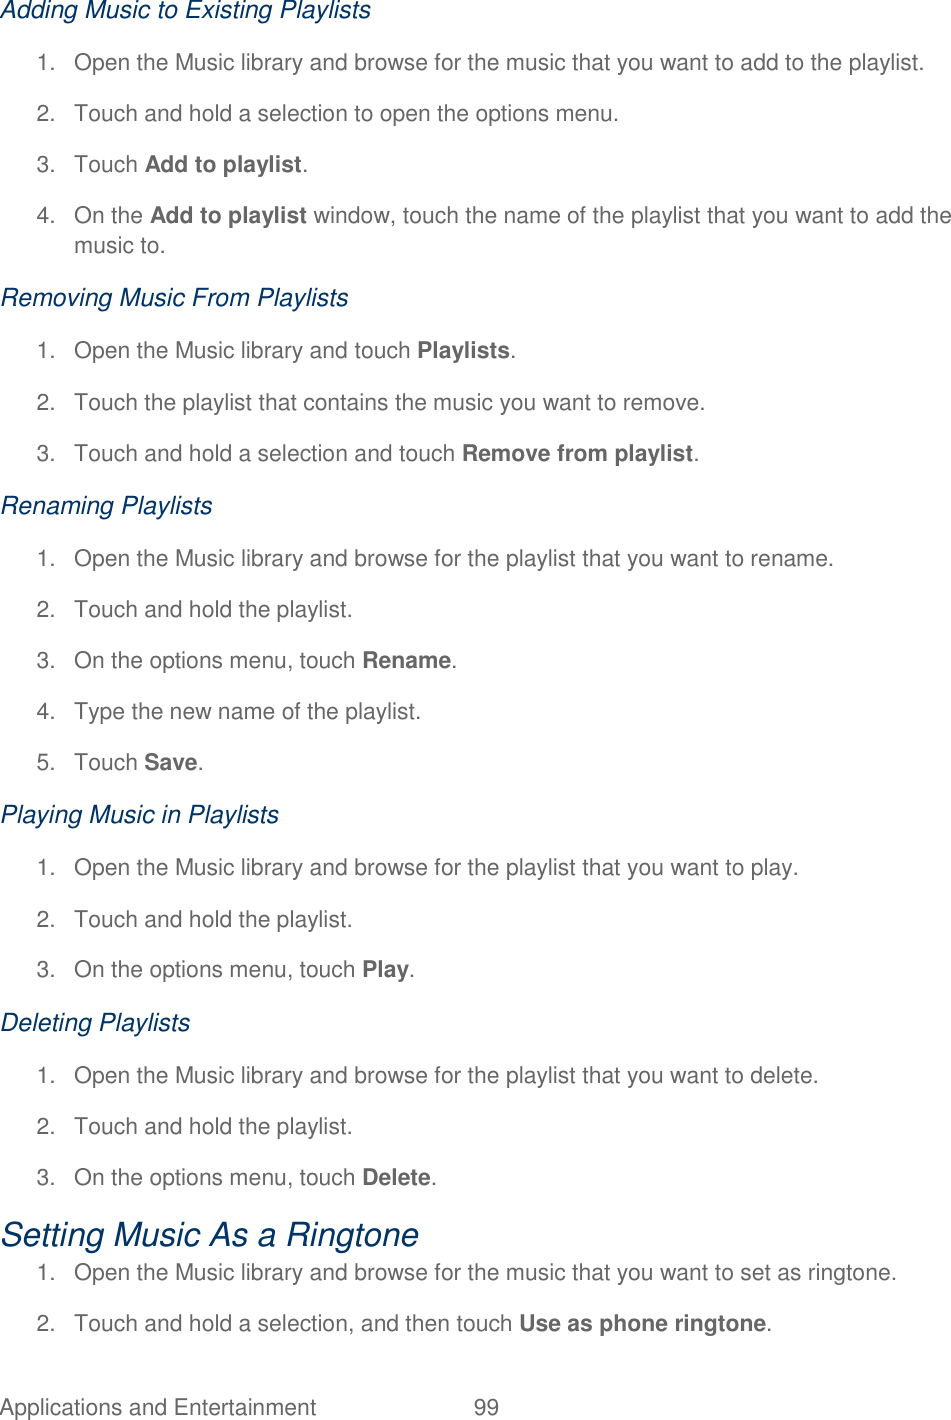 Applications and Entertainment  99   Adding Music to Existing Playlists 1.  Open the Music library and browse for the music that you want to add to the playlist. 2.  Touch and hold a selection to open the options menu. 3.  Touch Add to playlist. 4.  On the Add to playlist window, touch the name of the playlist that you want to add the music to. Removing Music From Playlists 1.  Open the Music library and touch Playlists. 2.  Touch the playlist that contains the music you want to remove. 3.  Touch and hold a selection and touch Remove from playlist. Renaming Playlists 1.  Open the Music library and browse for the playlist that you want to rename. 2.  Touch and hold the playlist. 3.  On the options menu, touch Rename. 4.  Type the new name of the playlist. 5.  Touch Save. Playing Music in Playlists 1.  Open the Music library and browse for the playlist that you want to play. 2.  Touch and hold the playlist. 3.  On the options menu, touch Play. Deleting Playlists 1.  Open the Music library and browse for the playlist that you want to delete. 2.  Touch and hold the playlist. 3.  On the options menu, touch Delete. Setting Music As a Ringtone 1.  Open the Music library and browse for the music that you want to set as ringtone. 2.  Touch and hold a selection, and then touch Use as phone ringtone. 